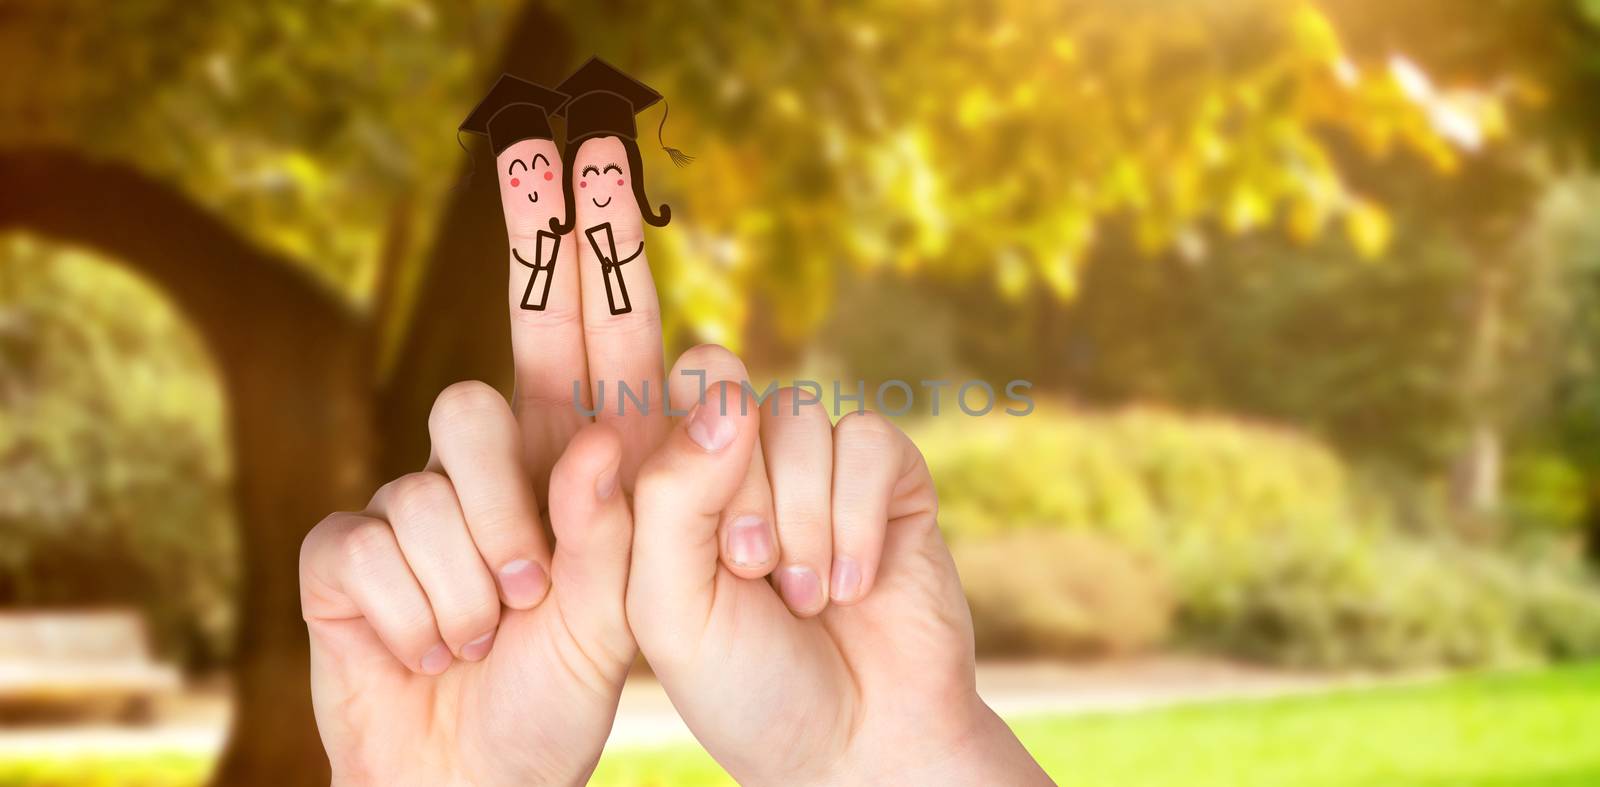 Fingers posed as students against trees and meadow in the park